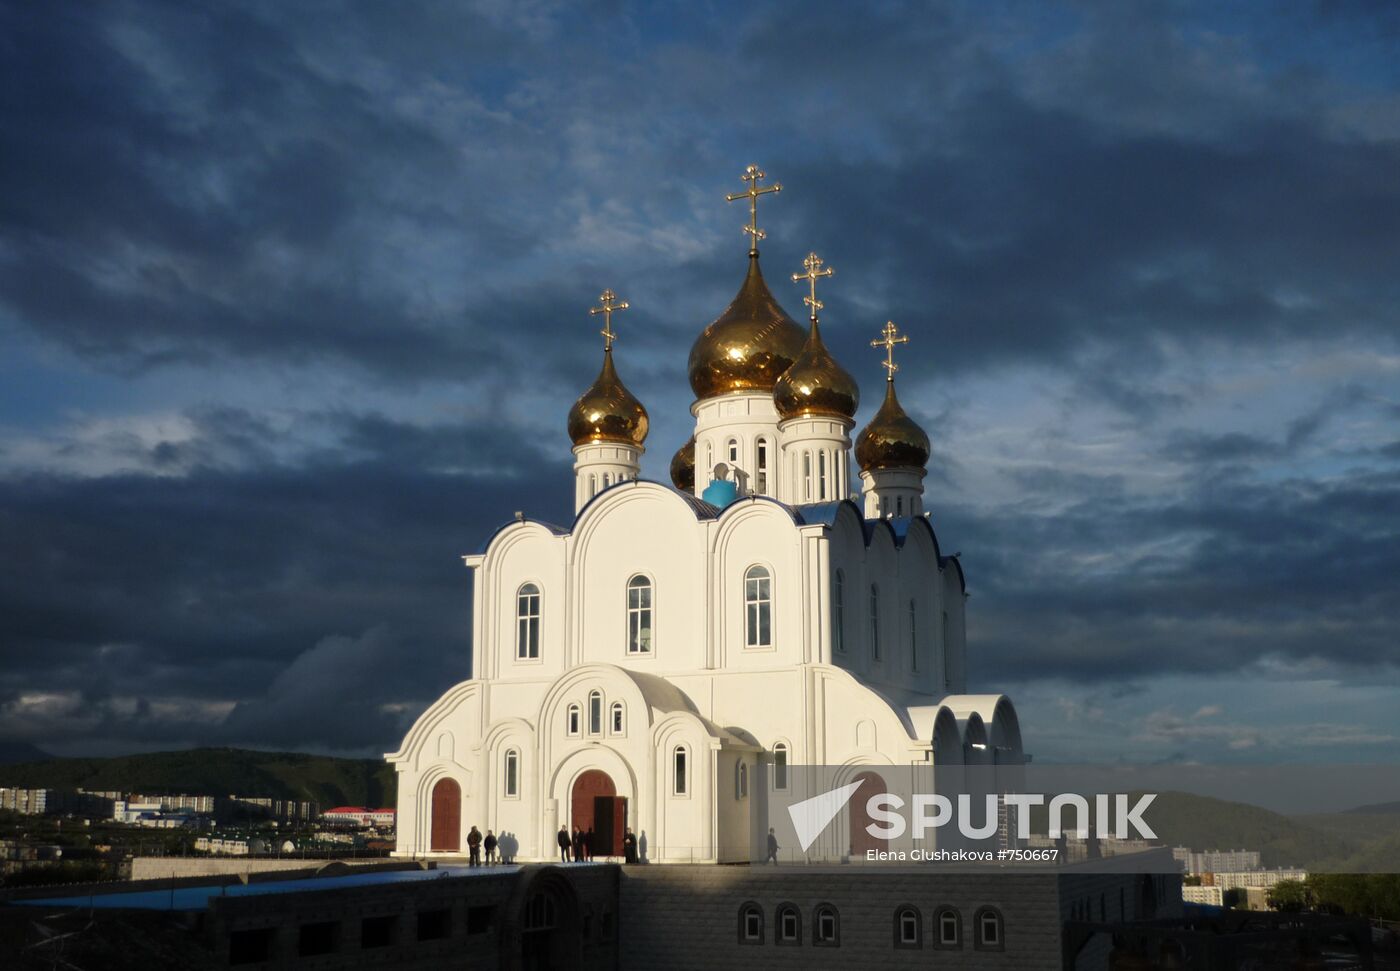 Life-Giving Trinity Cathedral in Petropavlovsk-Kamchatsky